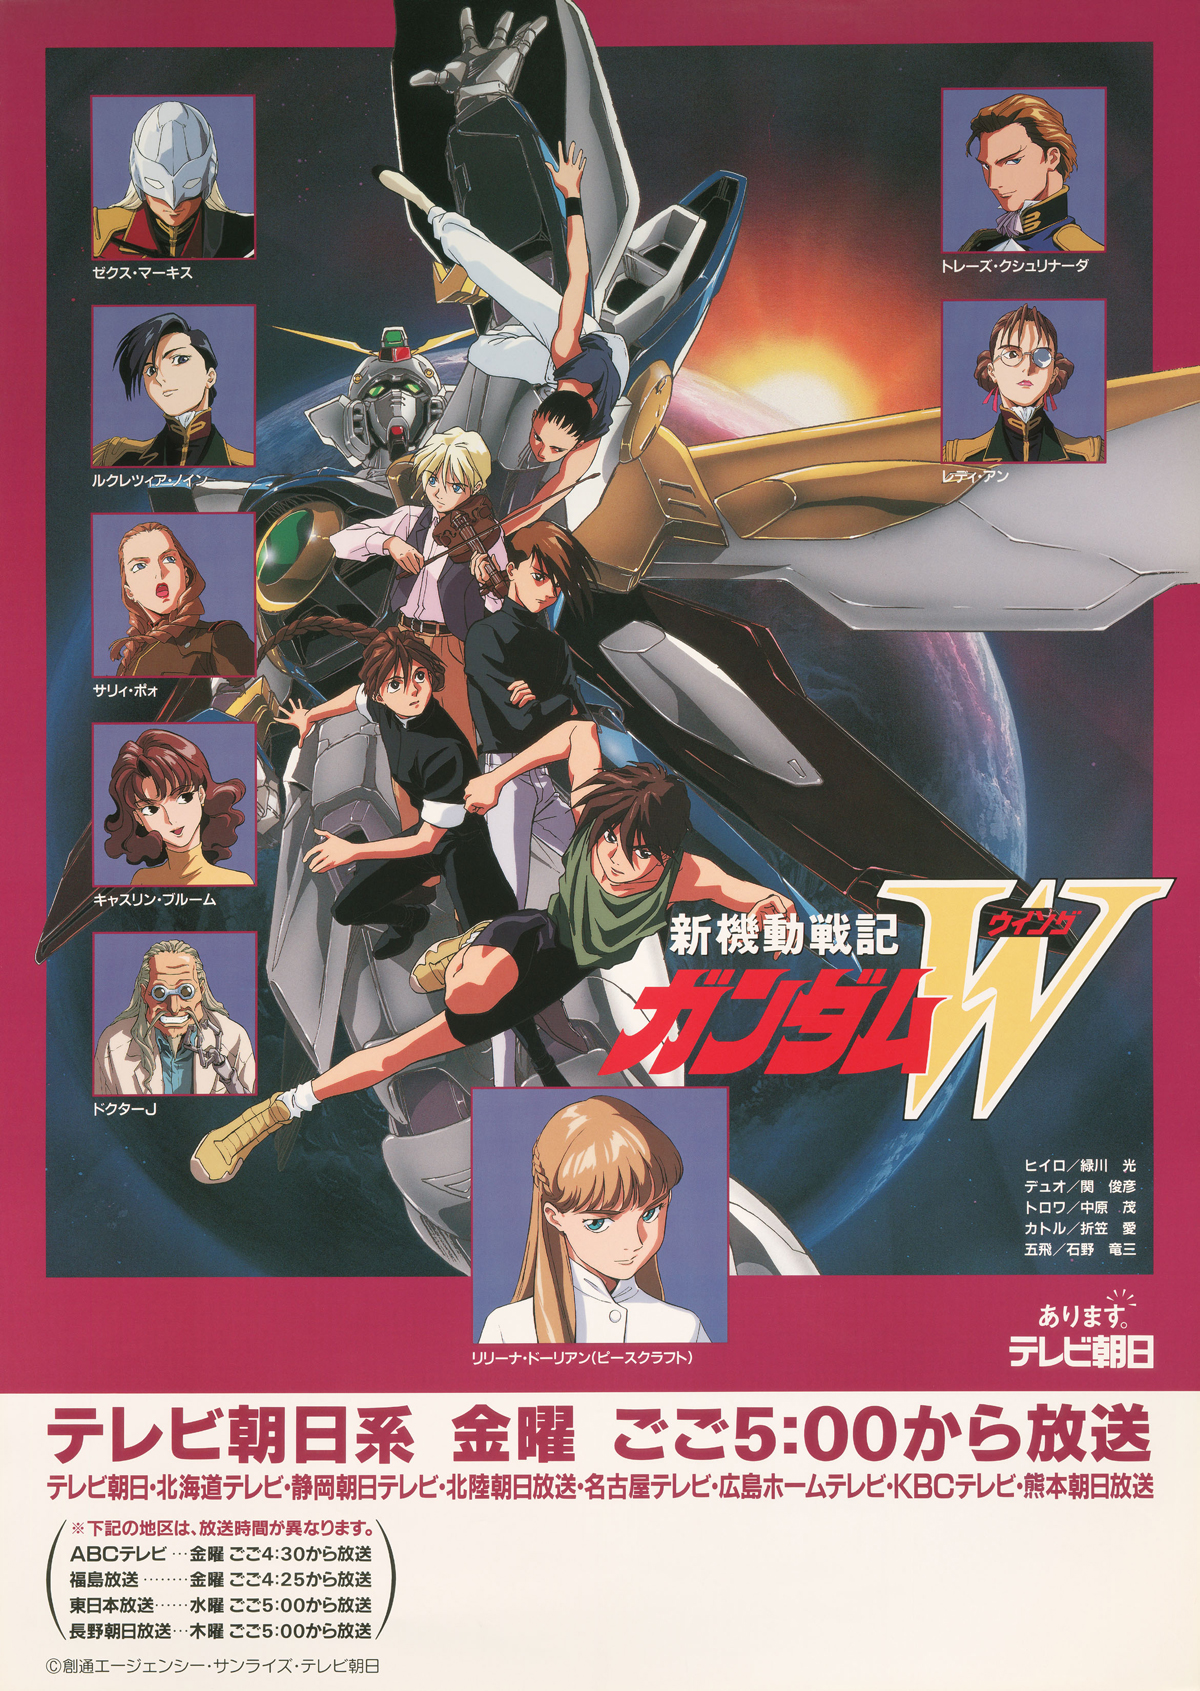 https://static.wikia.nocookie.net/allthetropes/images/8/8a/Mobile_Suit_Gundam_Wing_Poster.jpg/revision/latest?cb=20220225131811